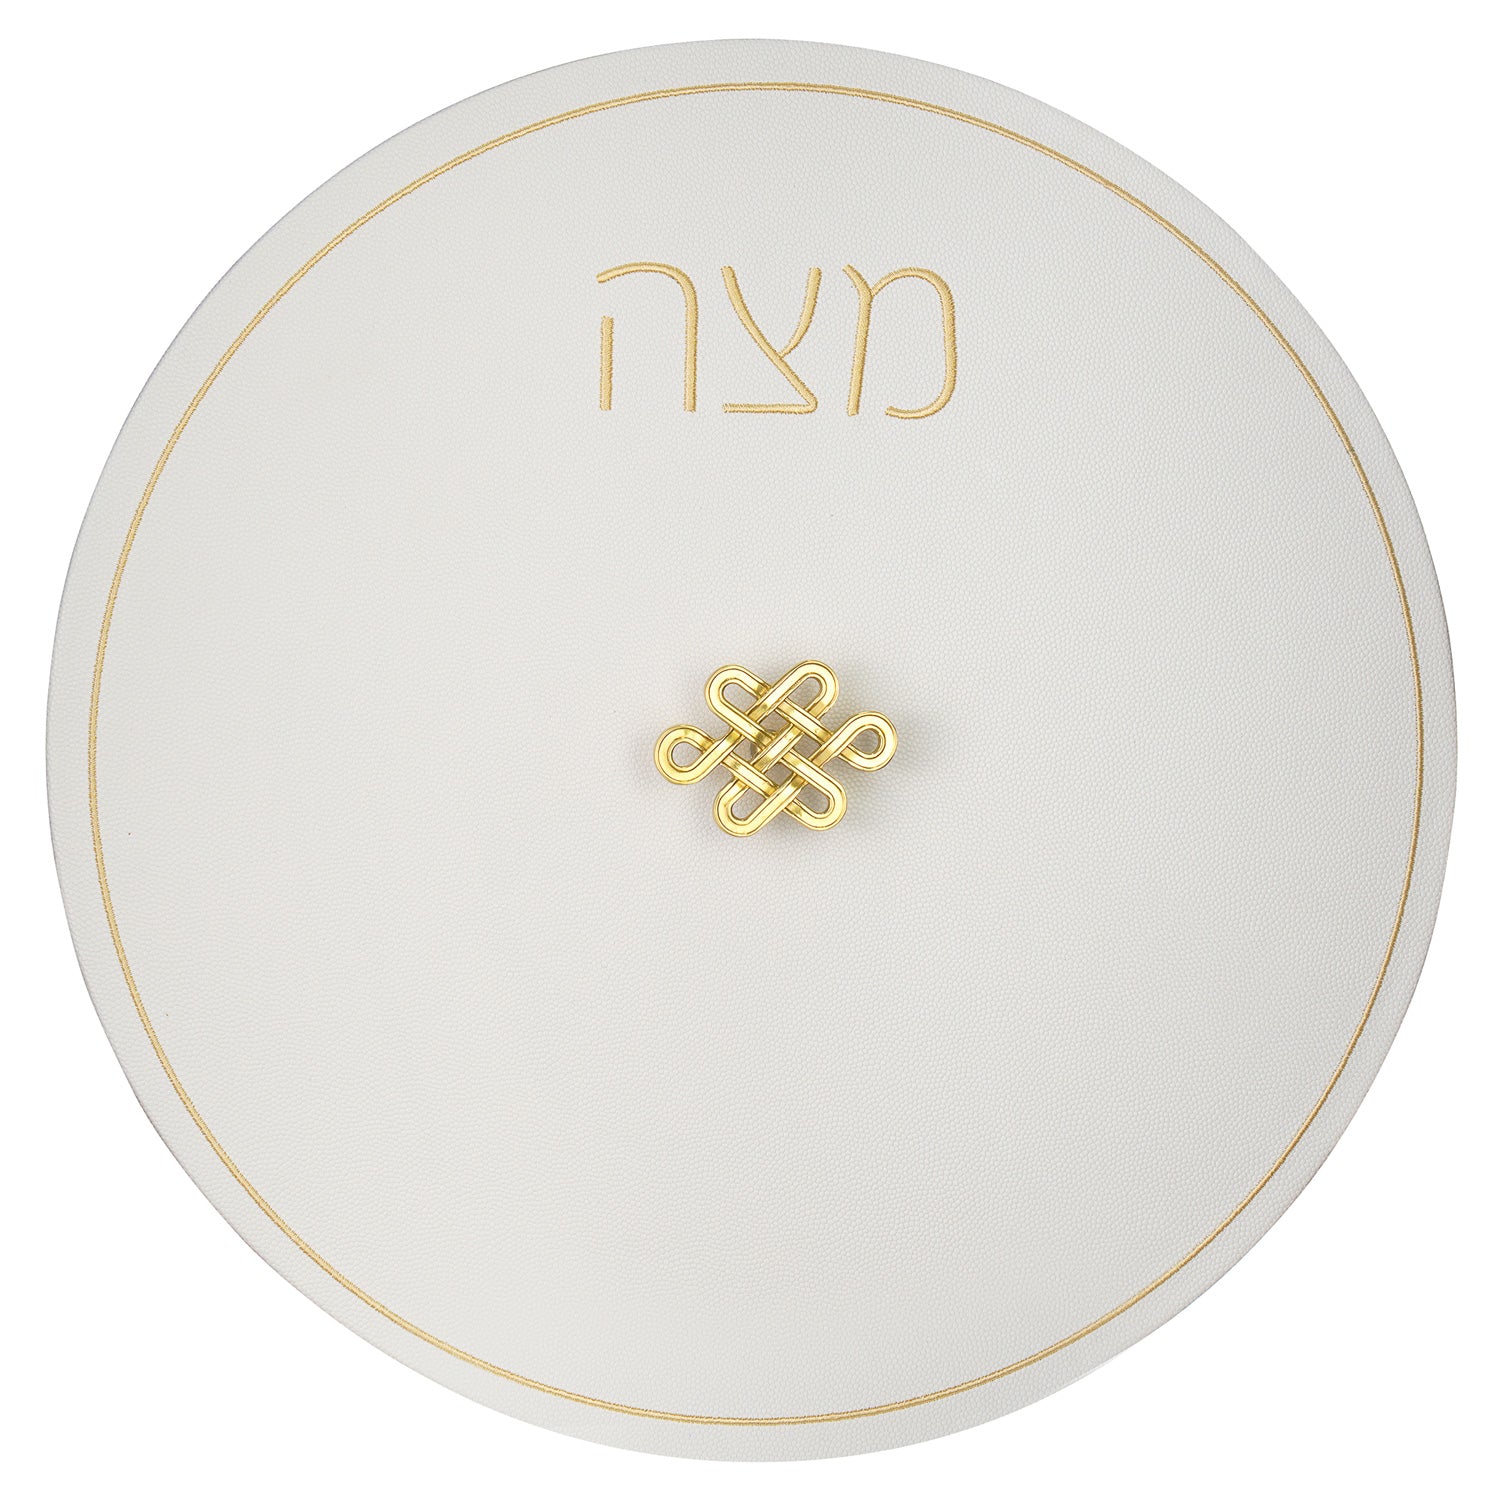 Lucite Matzah Box with White Leatherette Cover and Knot Handle